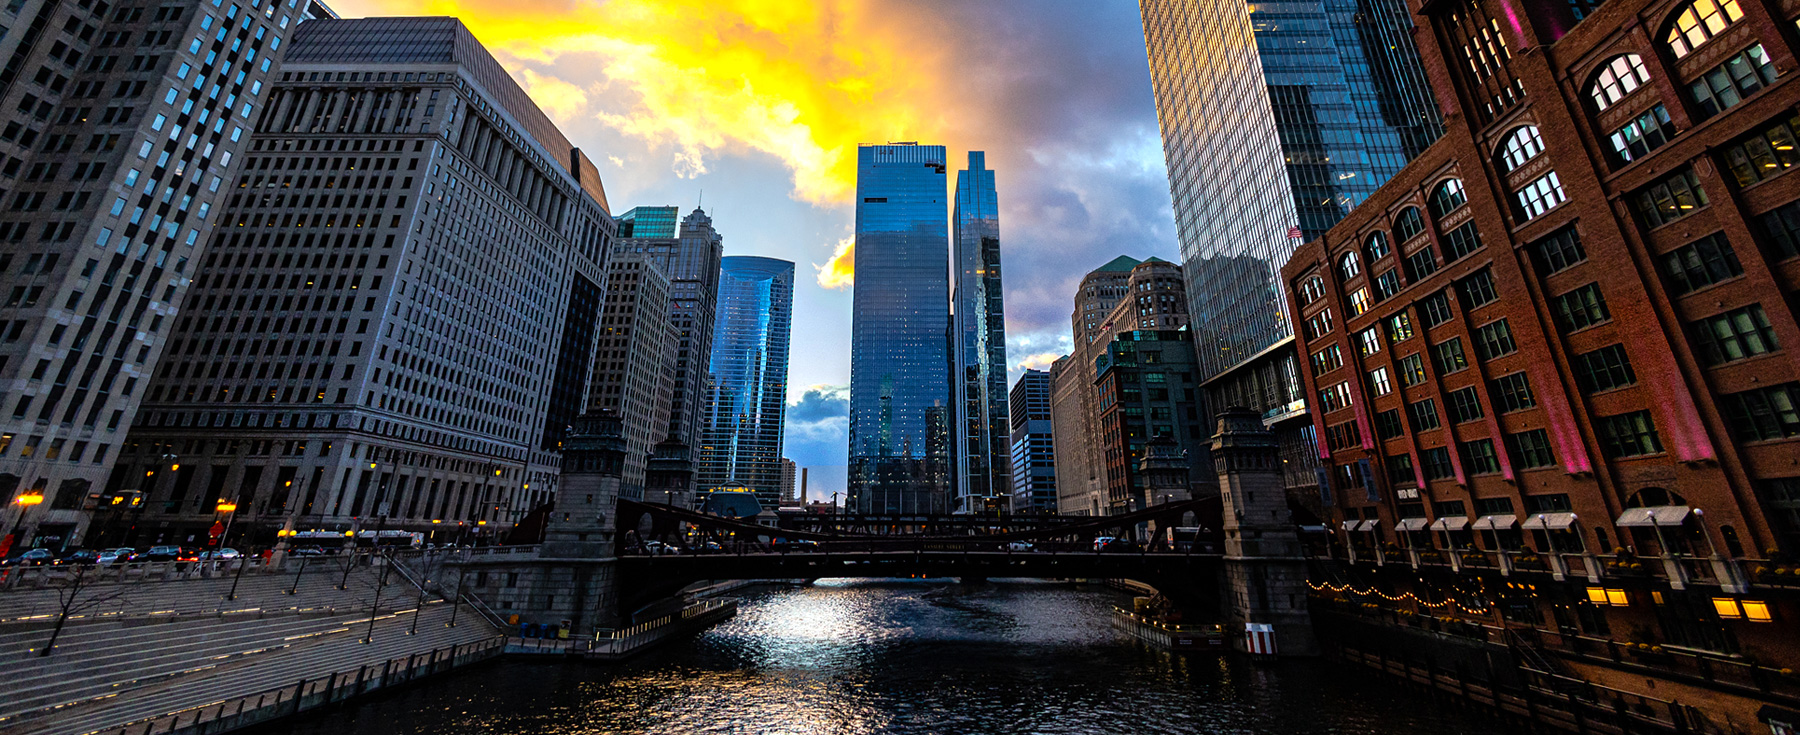 A beautiful sunset over the Chicago River in the heart of Chicago's loop